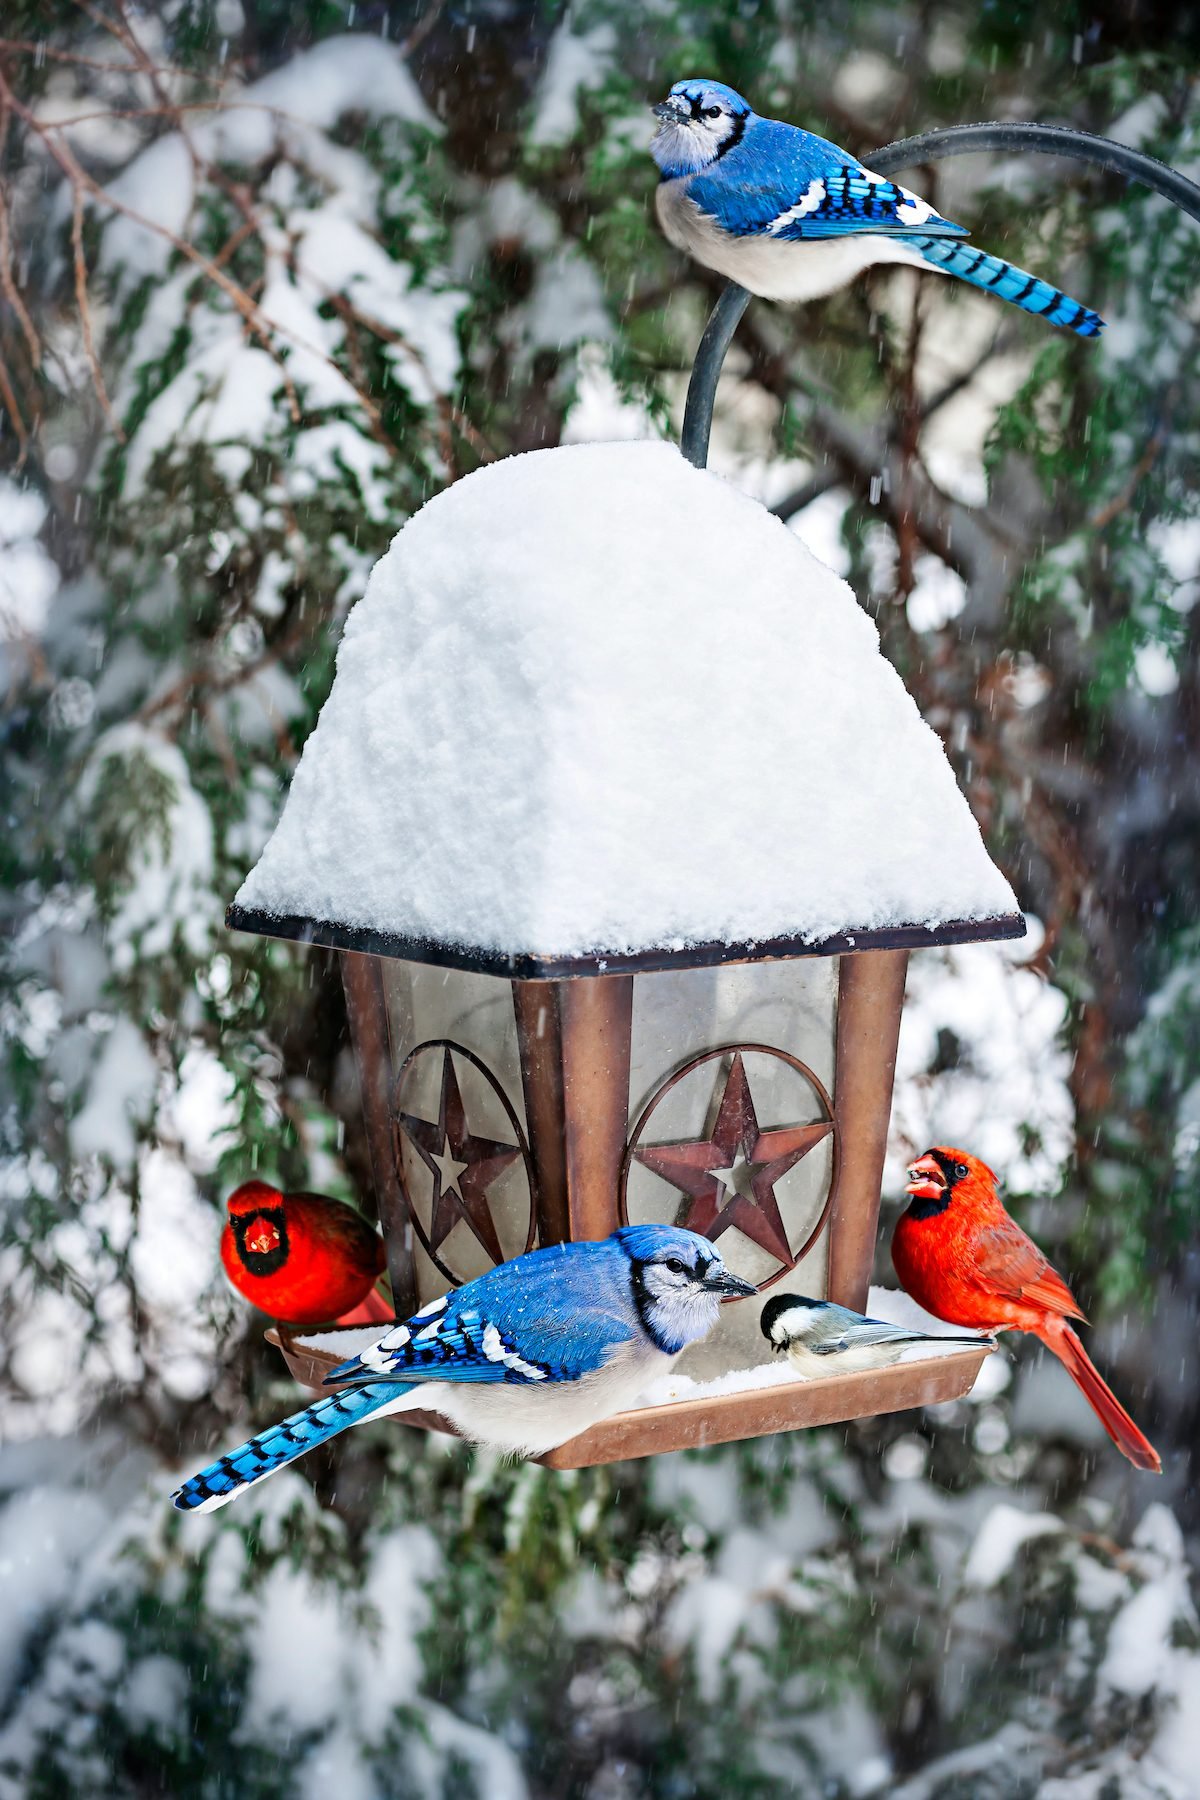 Is There a Blue Colored Cardinal Bird? - Birds and Blooms